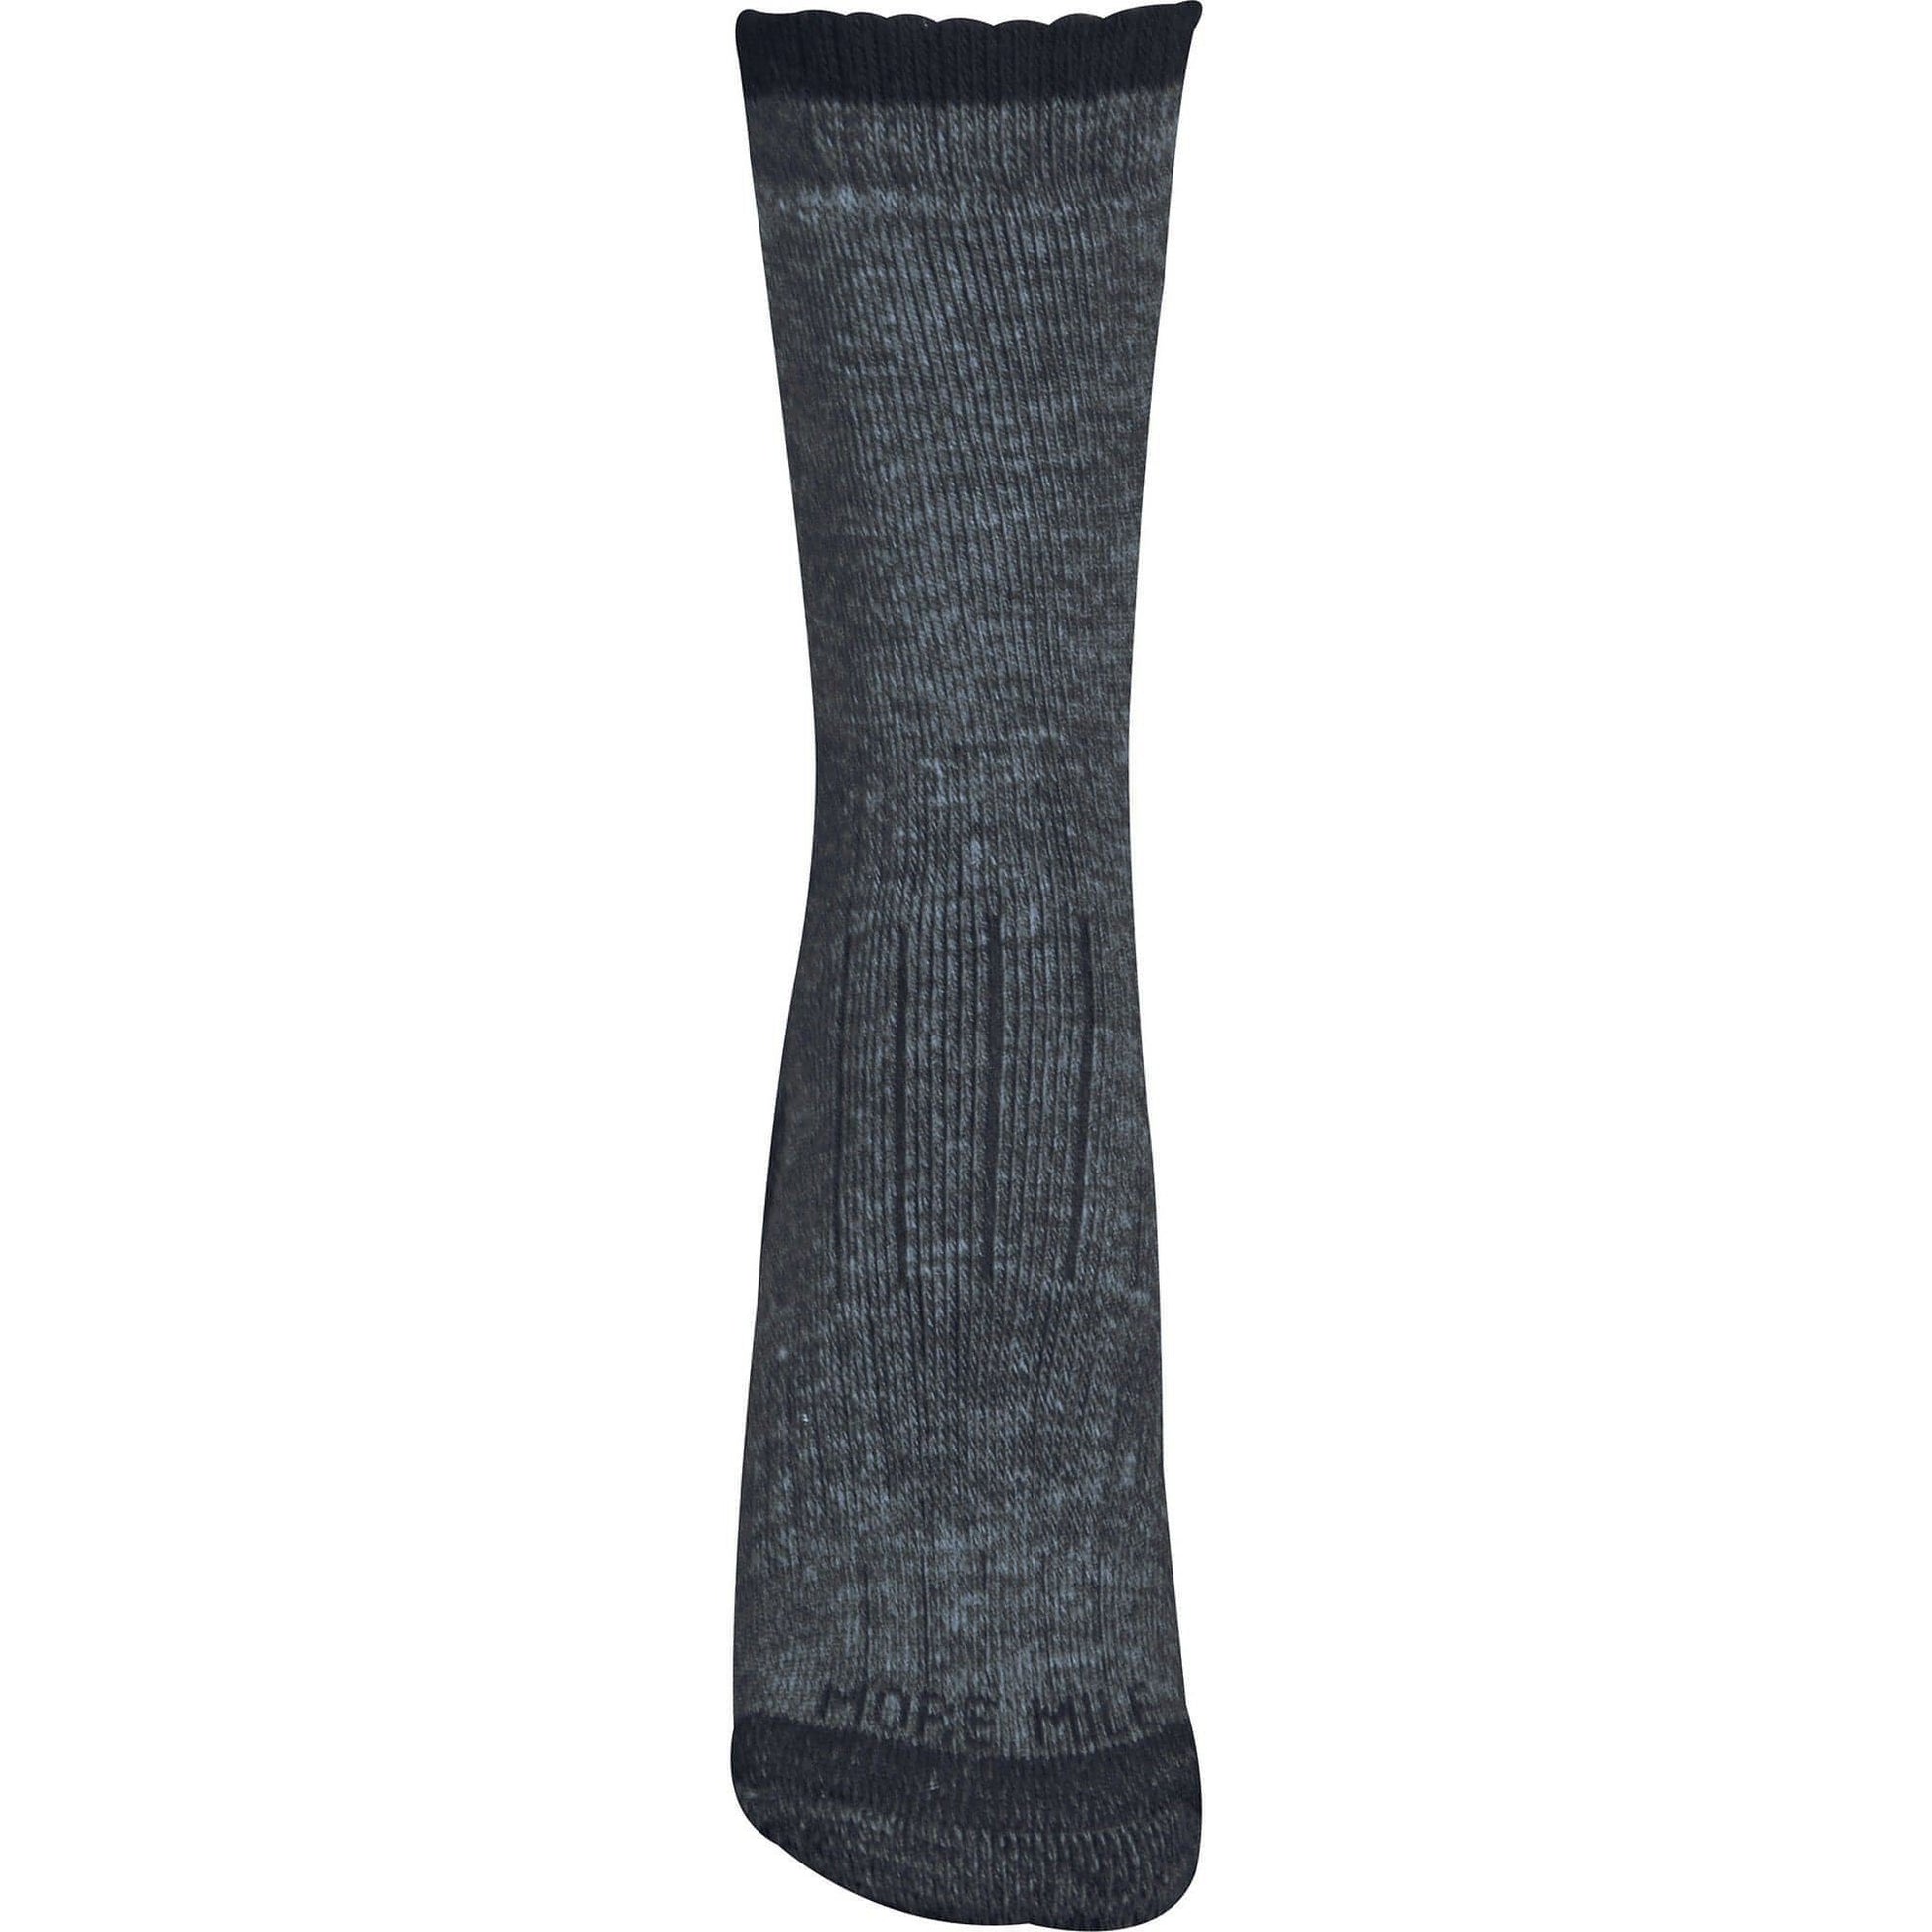 More Mile Merino Wool Socks Mm3055 Front - Front View